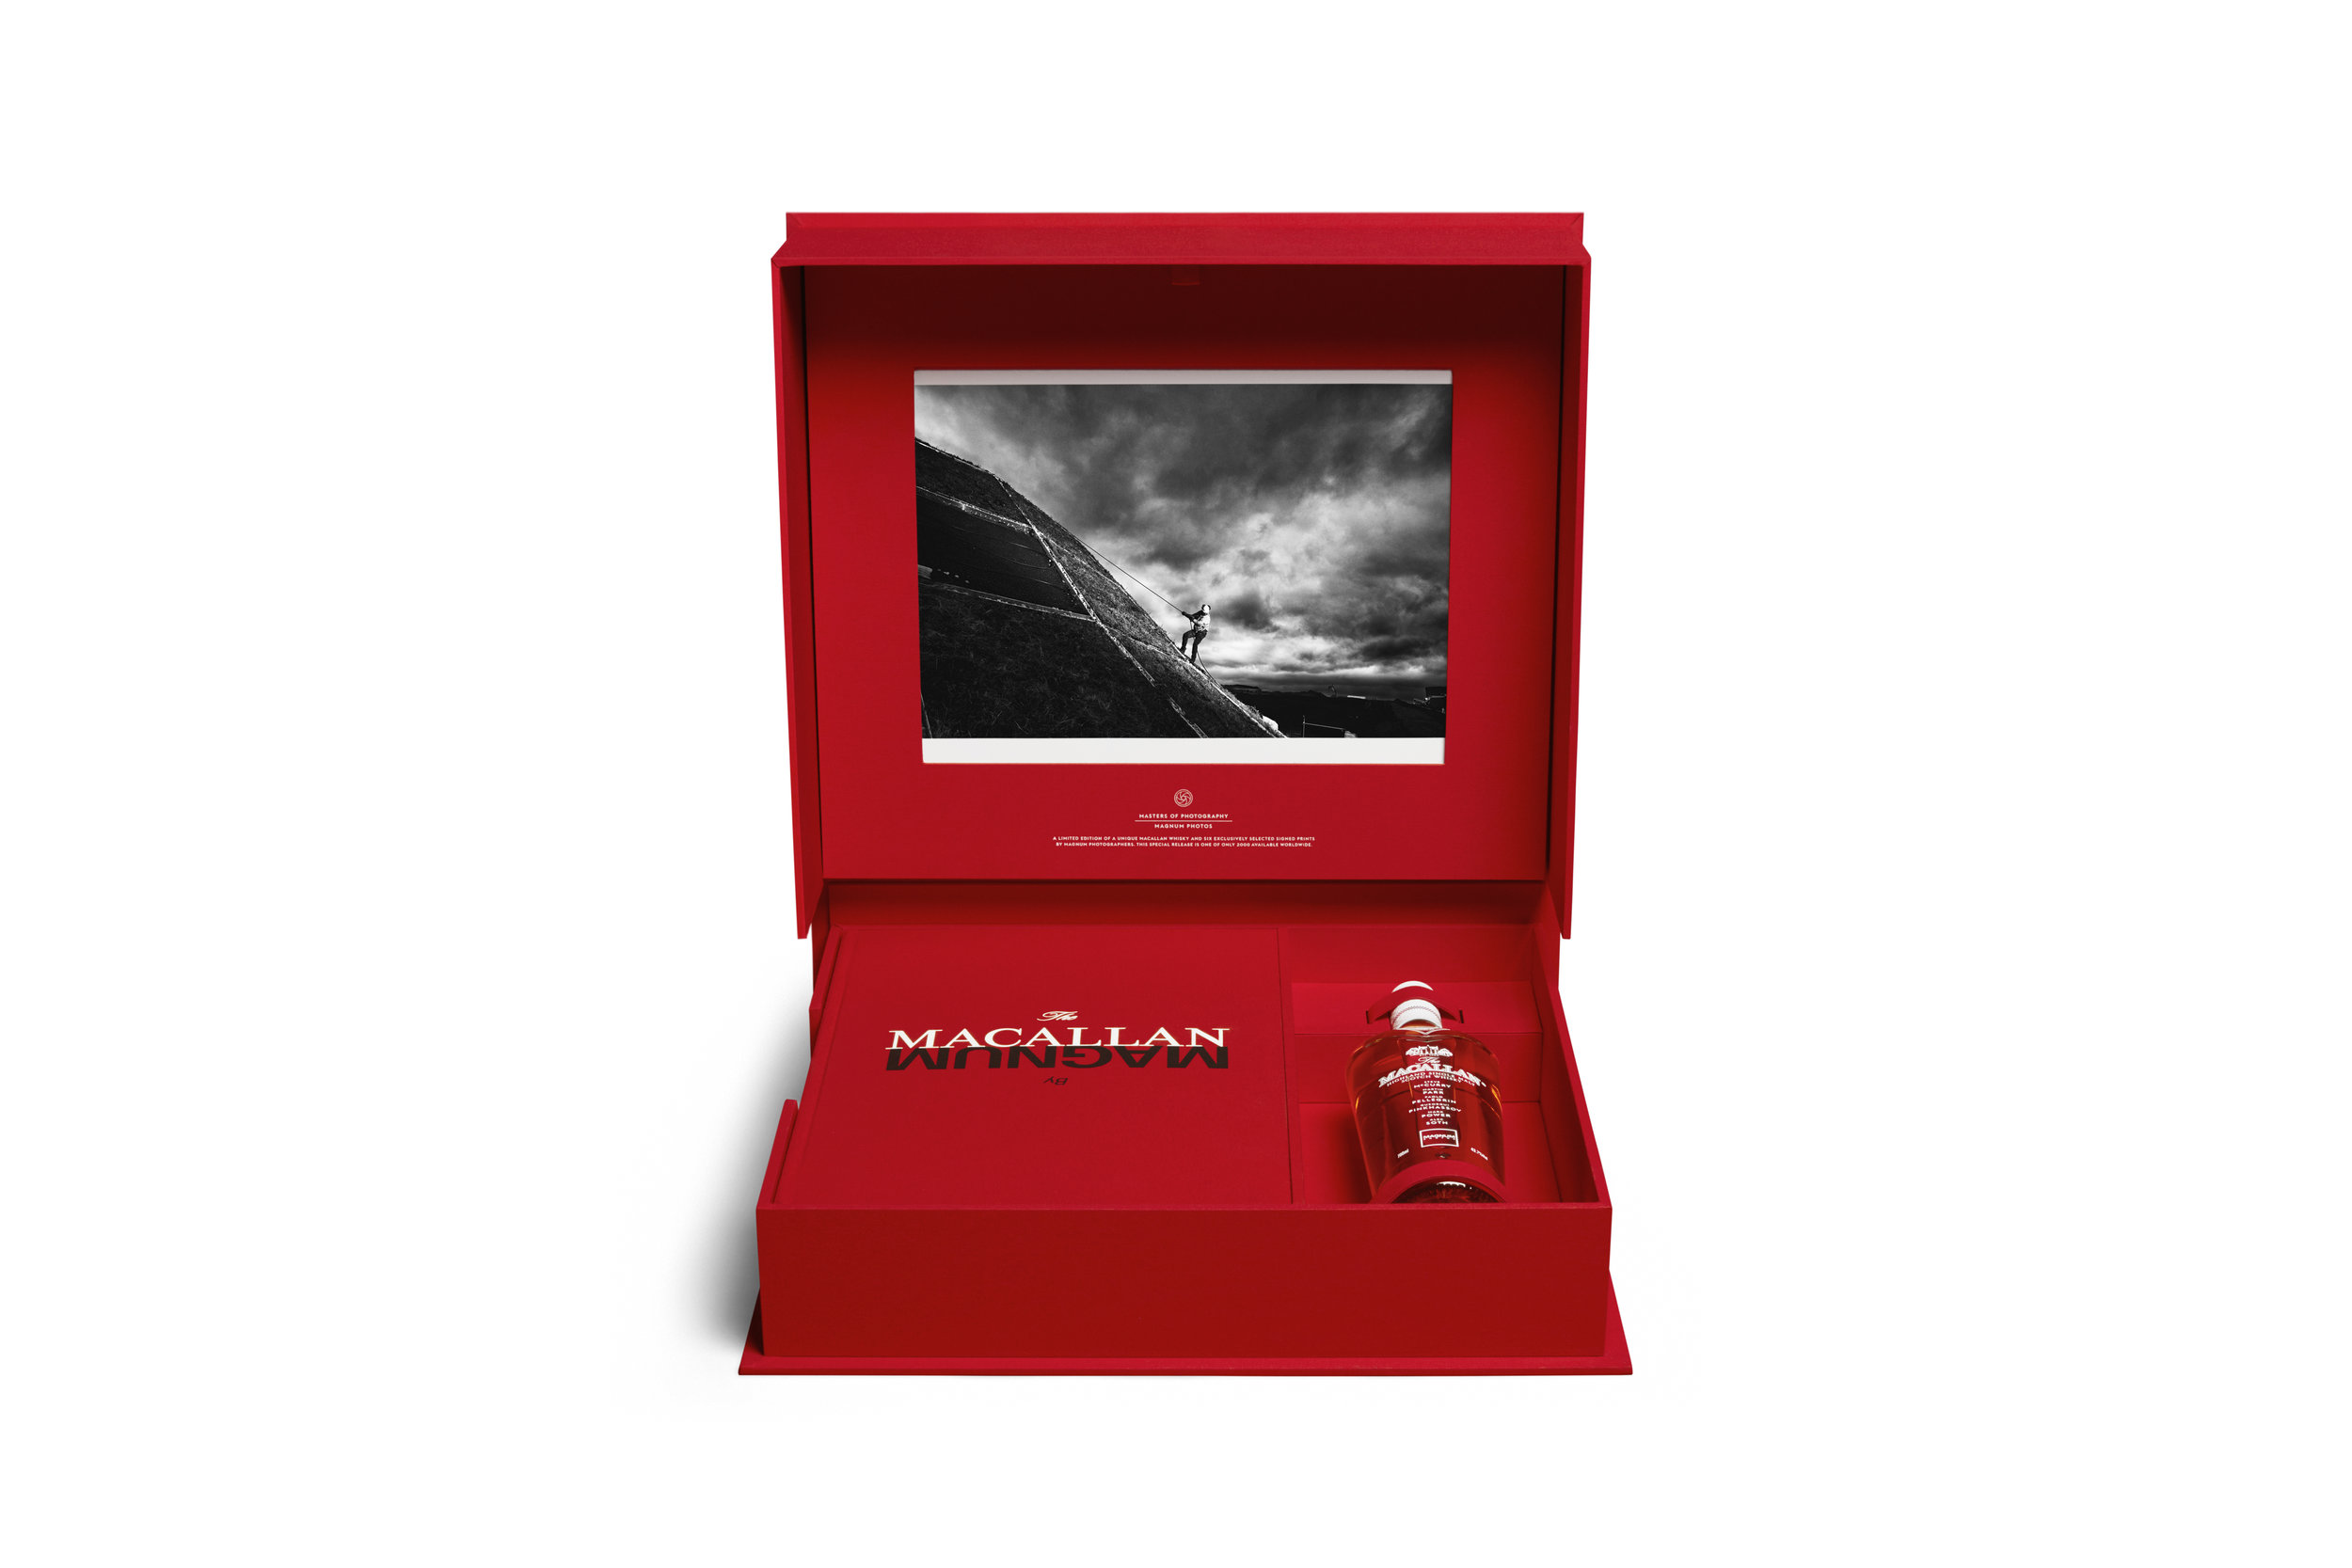 6. The Macallan Masters of Photography Magnum Edition_Paolo Pellegrin.jpg